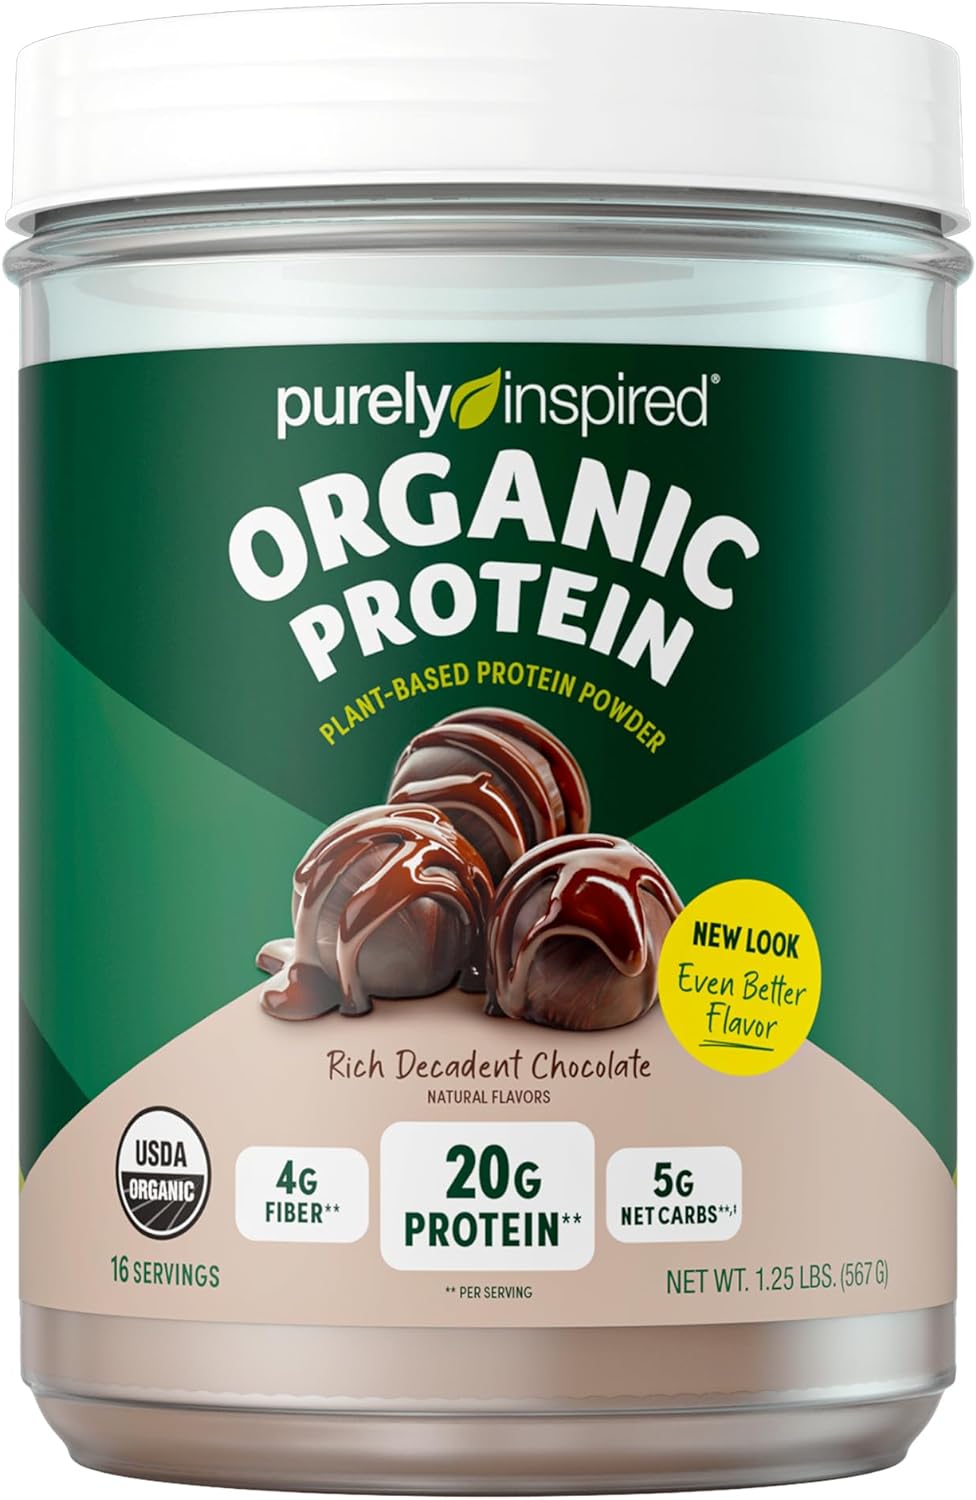 Purely Inspired Plant-Based Protein Powder 16 Servings - Vegan Organic - 20g of Pea Protein Powder for Smoothies Shakes